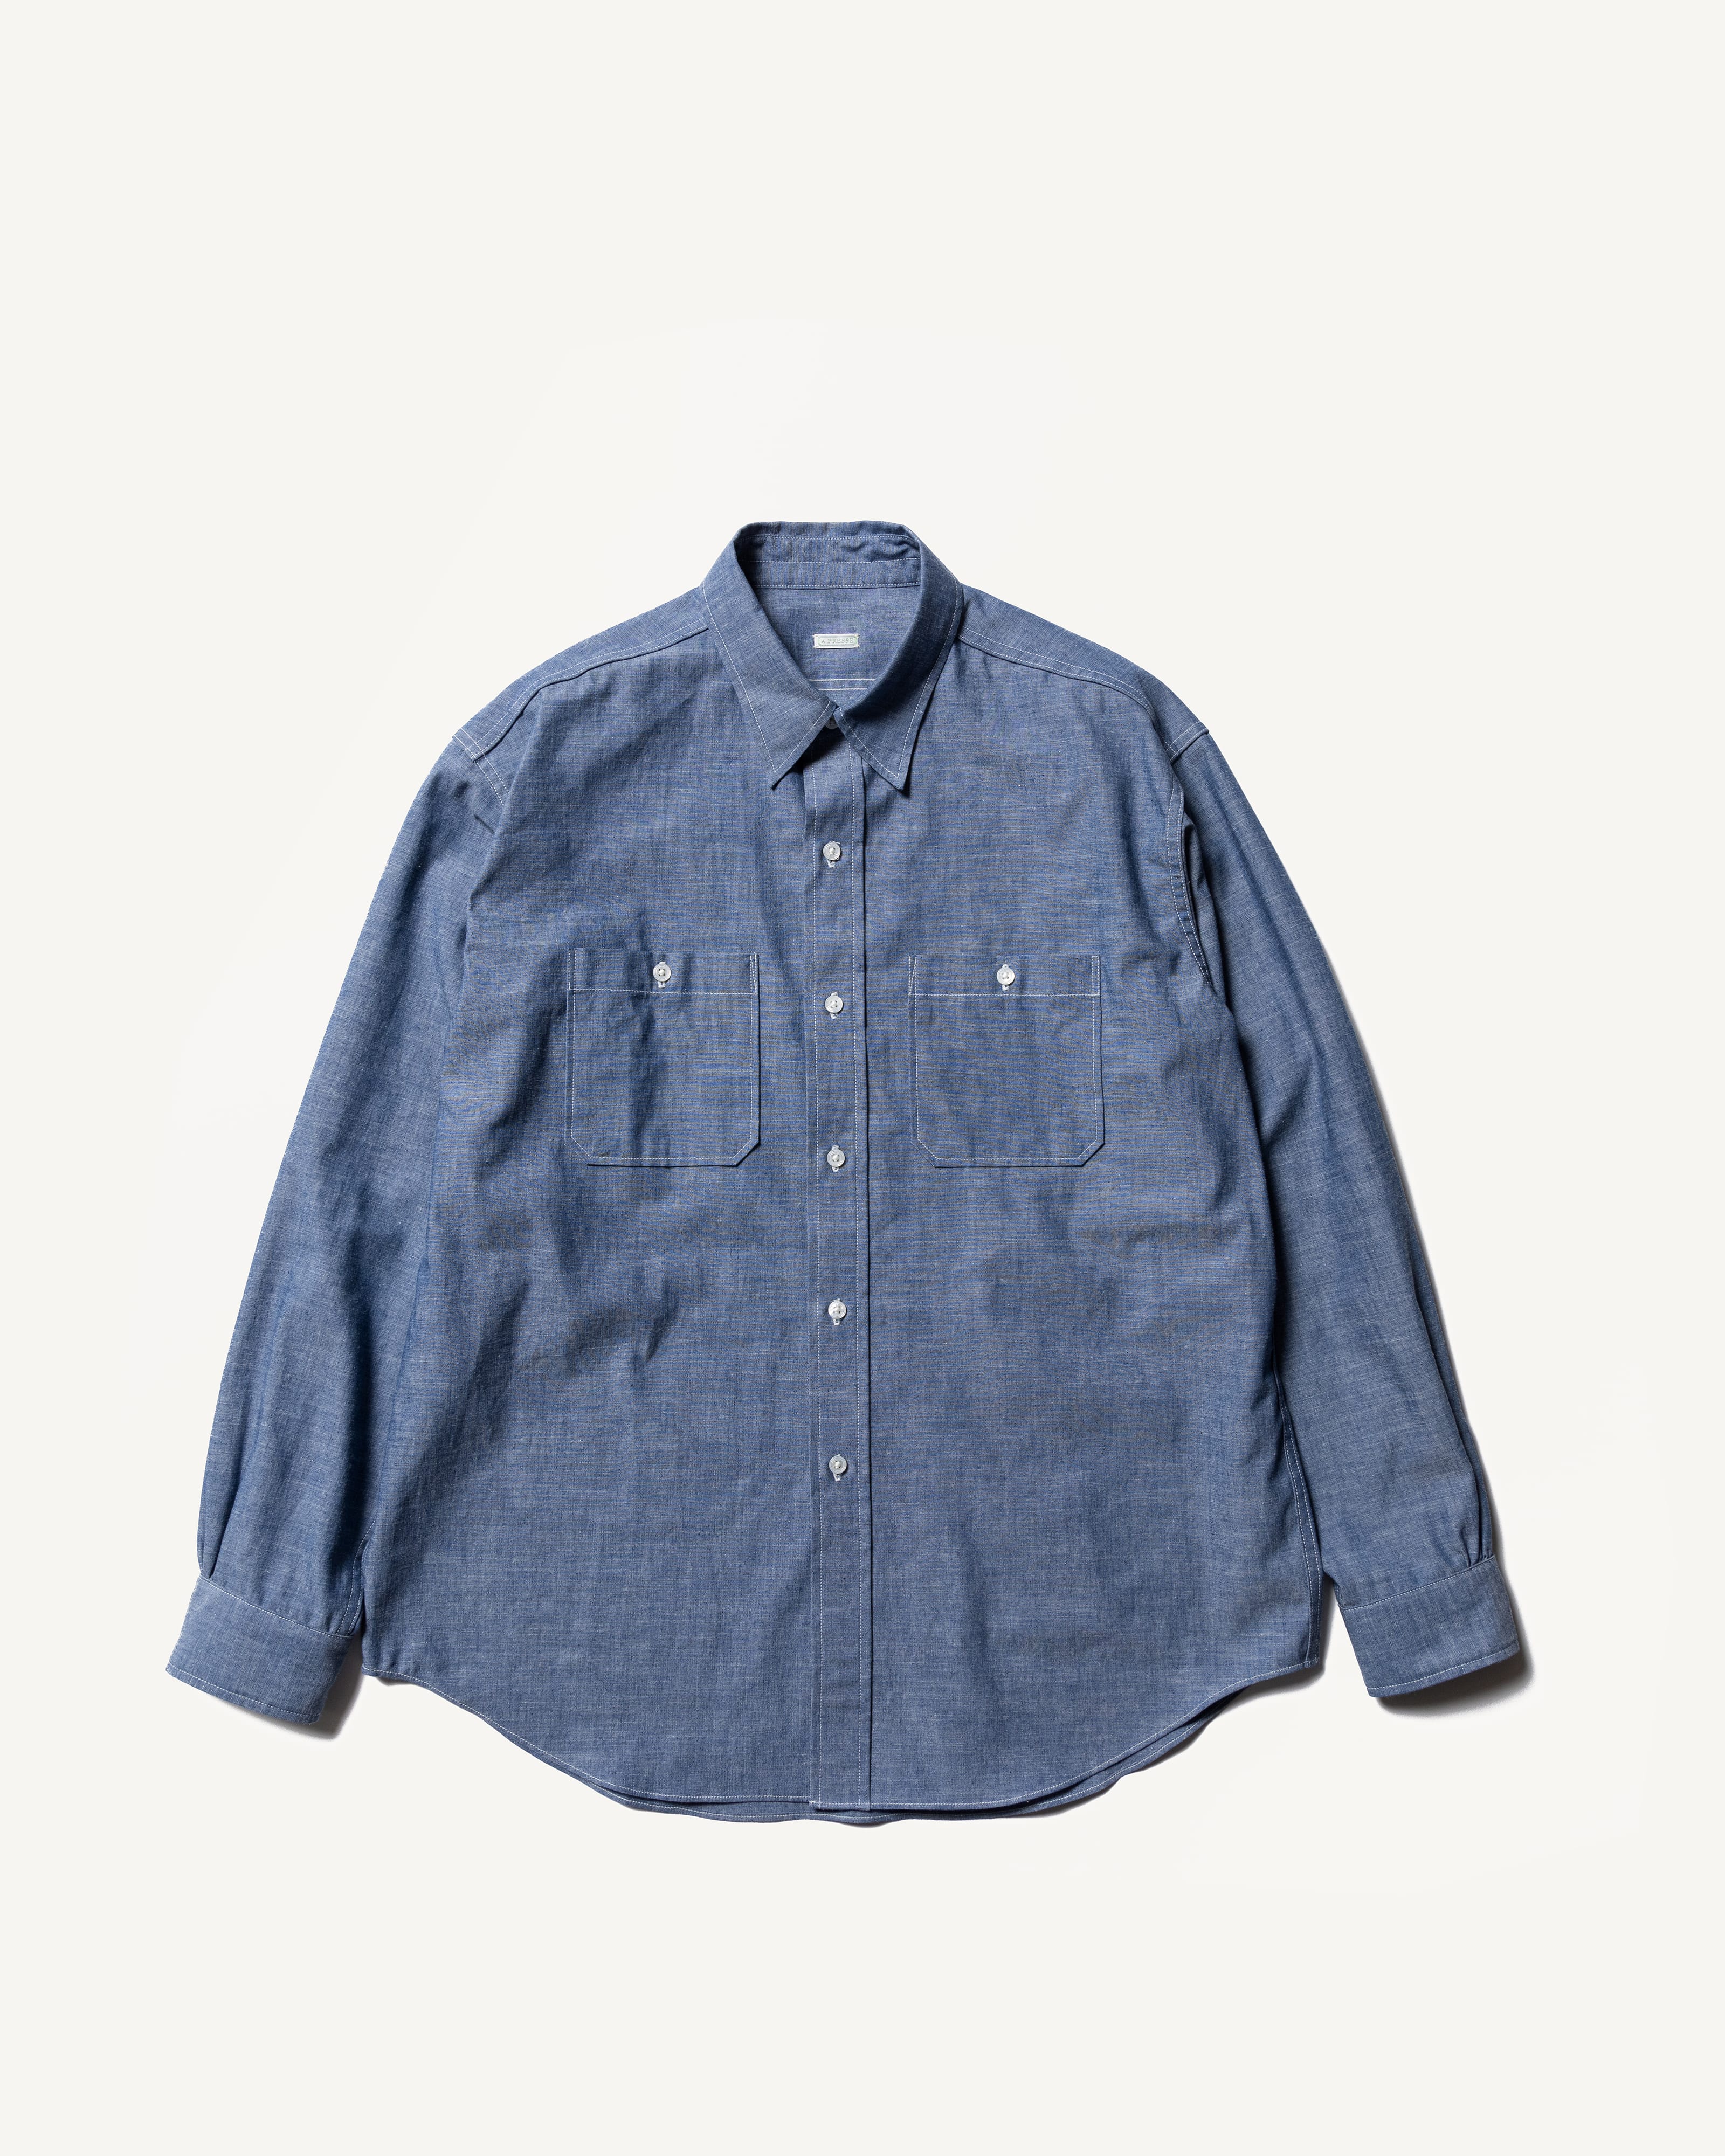 Rigid Chambray Shirt INDIGO – TIME AFTER TIME